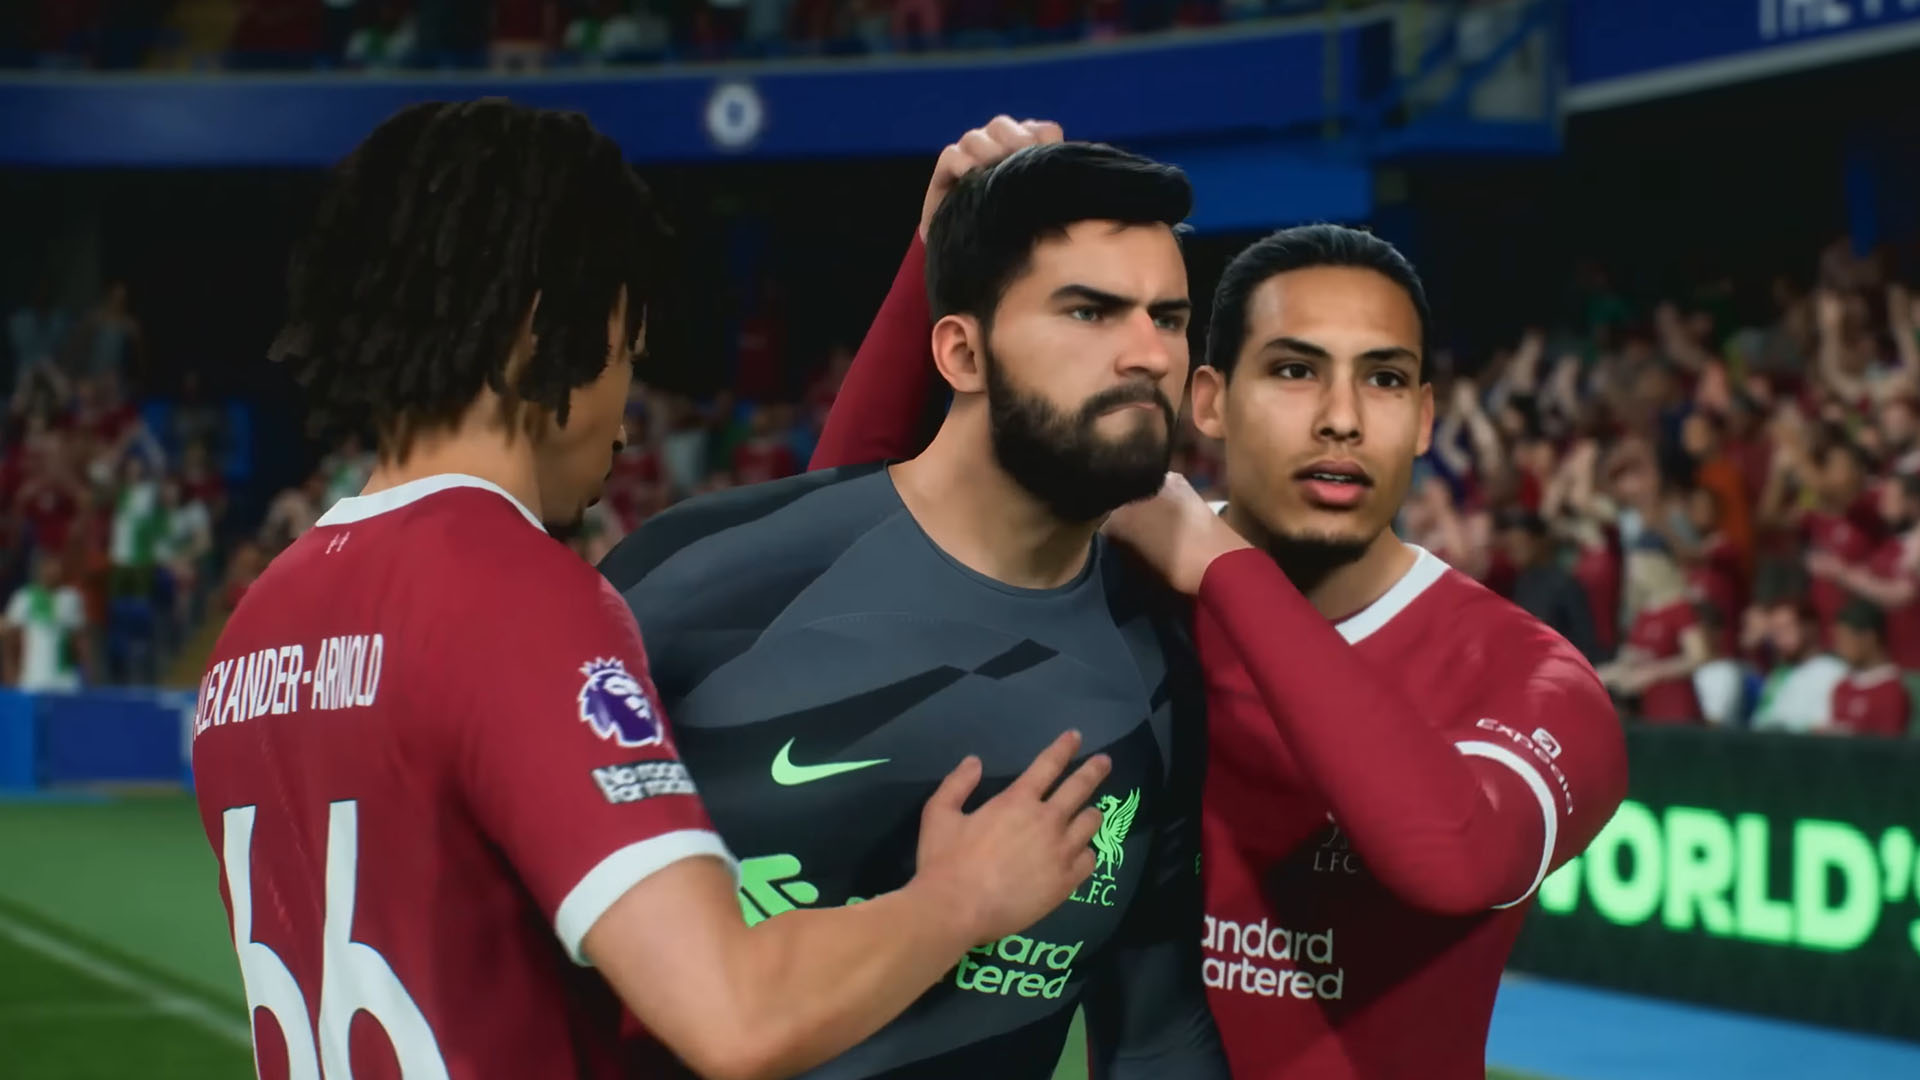 EA FC 24 release time: here's when it goes live on PS5, PS4, Xbox